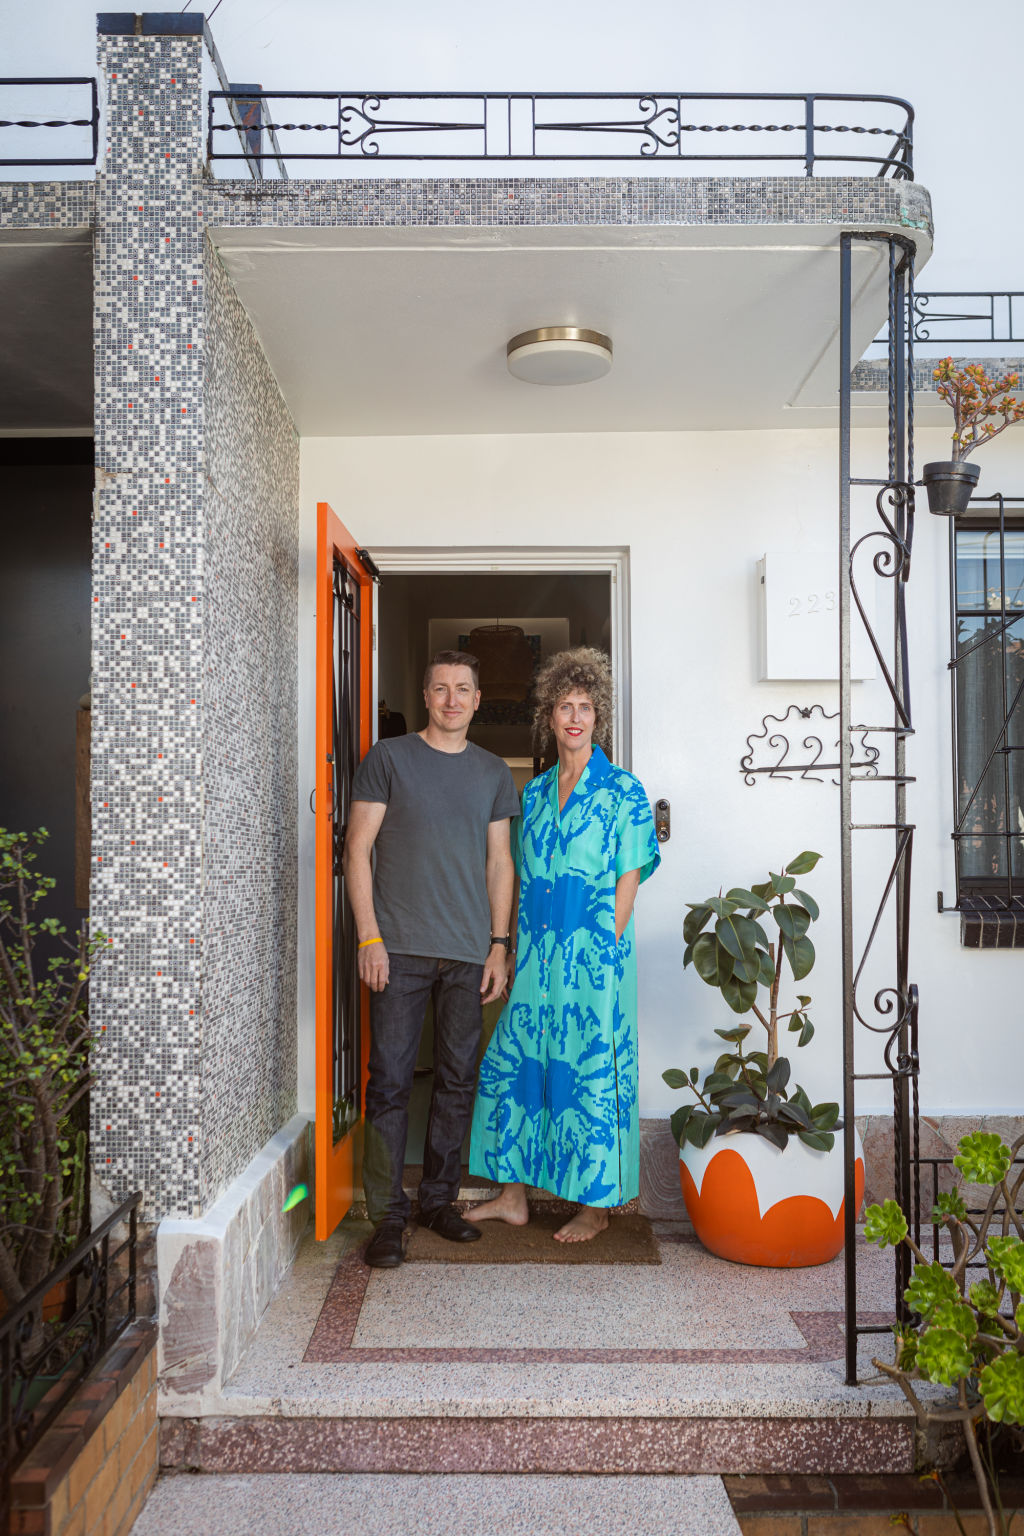 'We are so proud of this house,' says Sommer Hampson, with husband John Mieog, of their Brunswick property. Photo: Greg Briggs